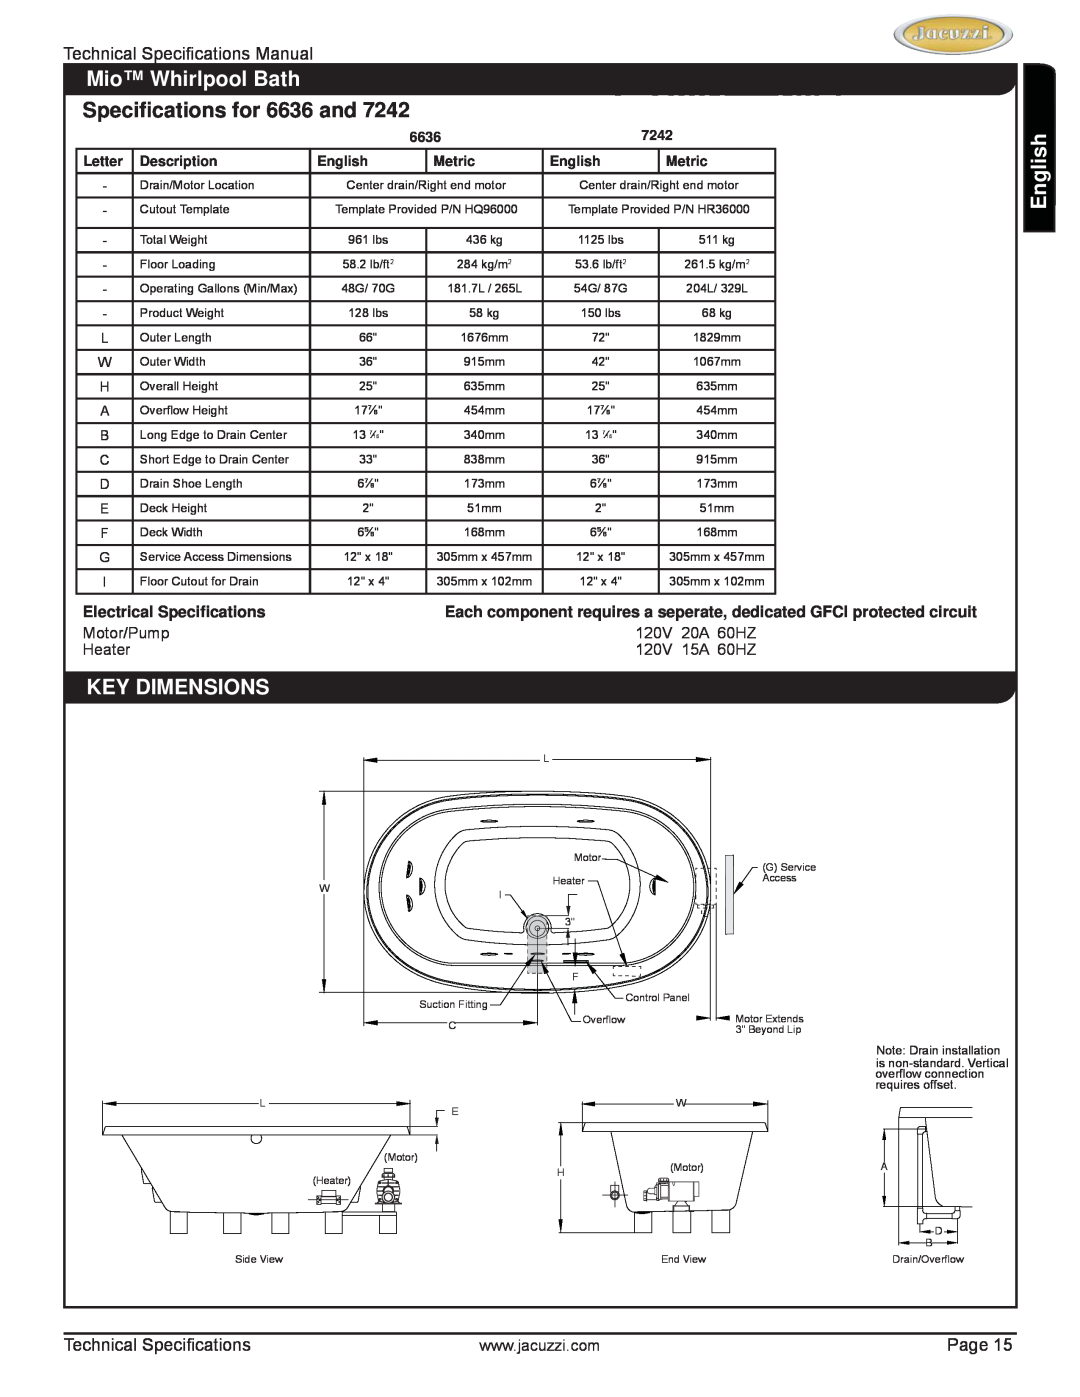 Jacuzzi HD85000 Mio Whirlpool Bath, Speciﬁcations for 6636 and, English, Key Dimensions, Electrical Speciﬁcations, 120V 